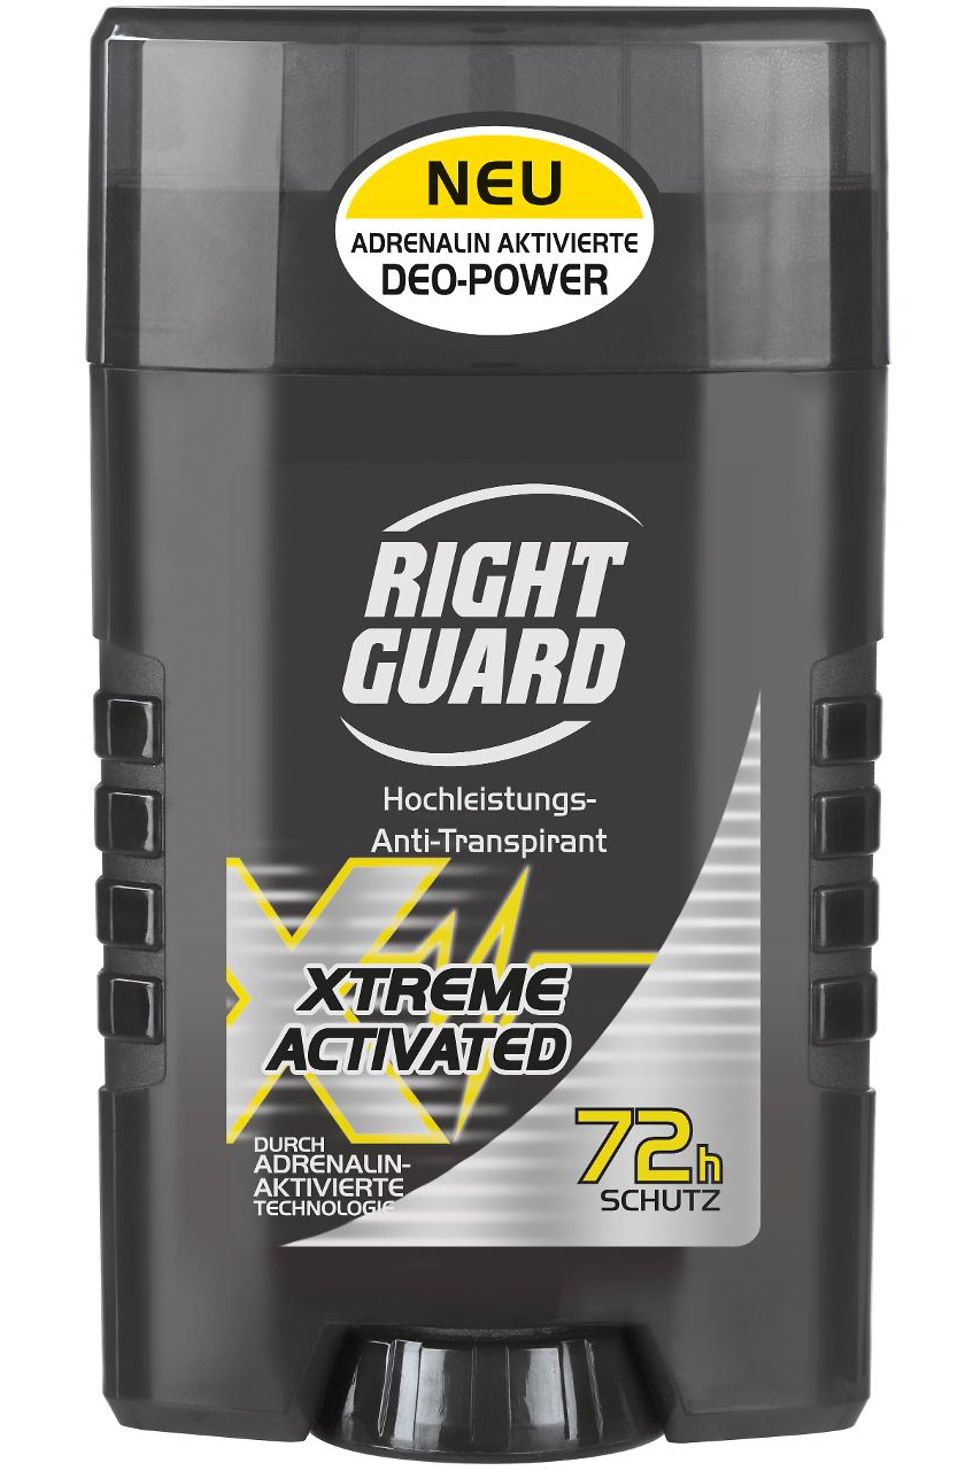 Right Guard Xtreme Activated Hochleistungs-Anti-Transpirant Stick